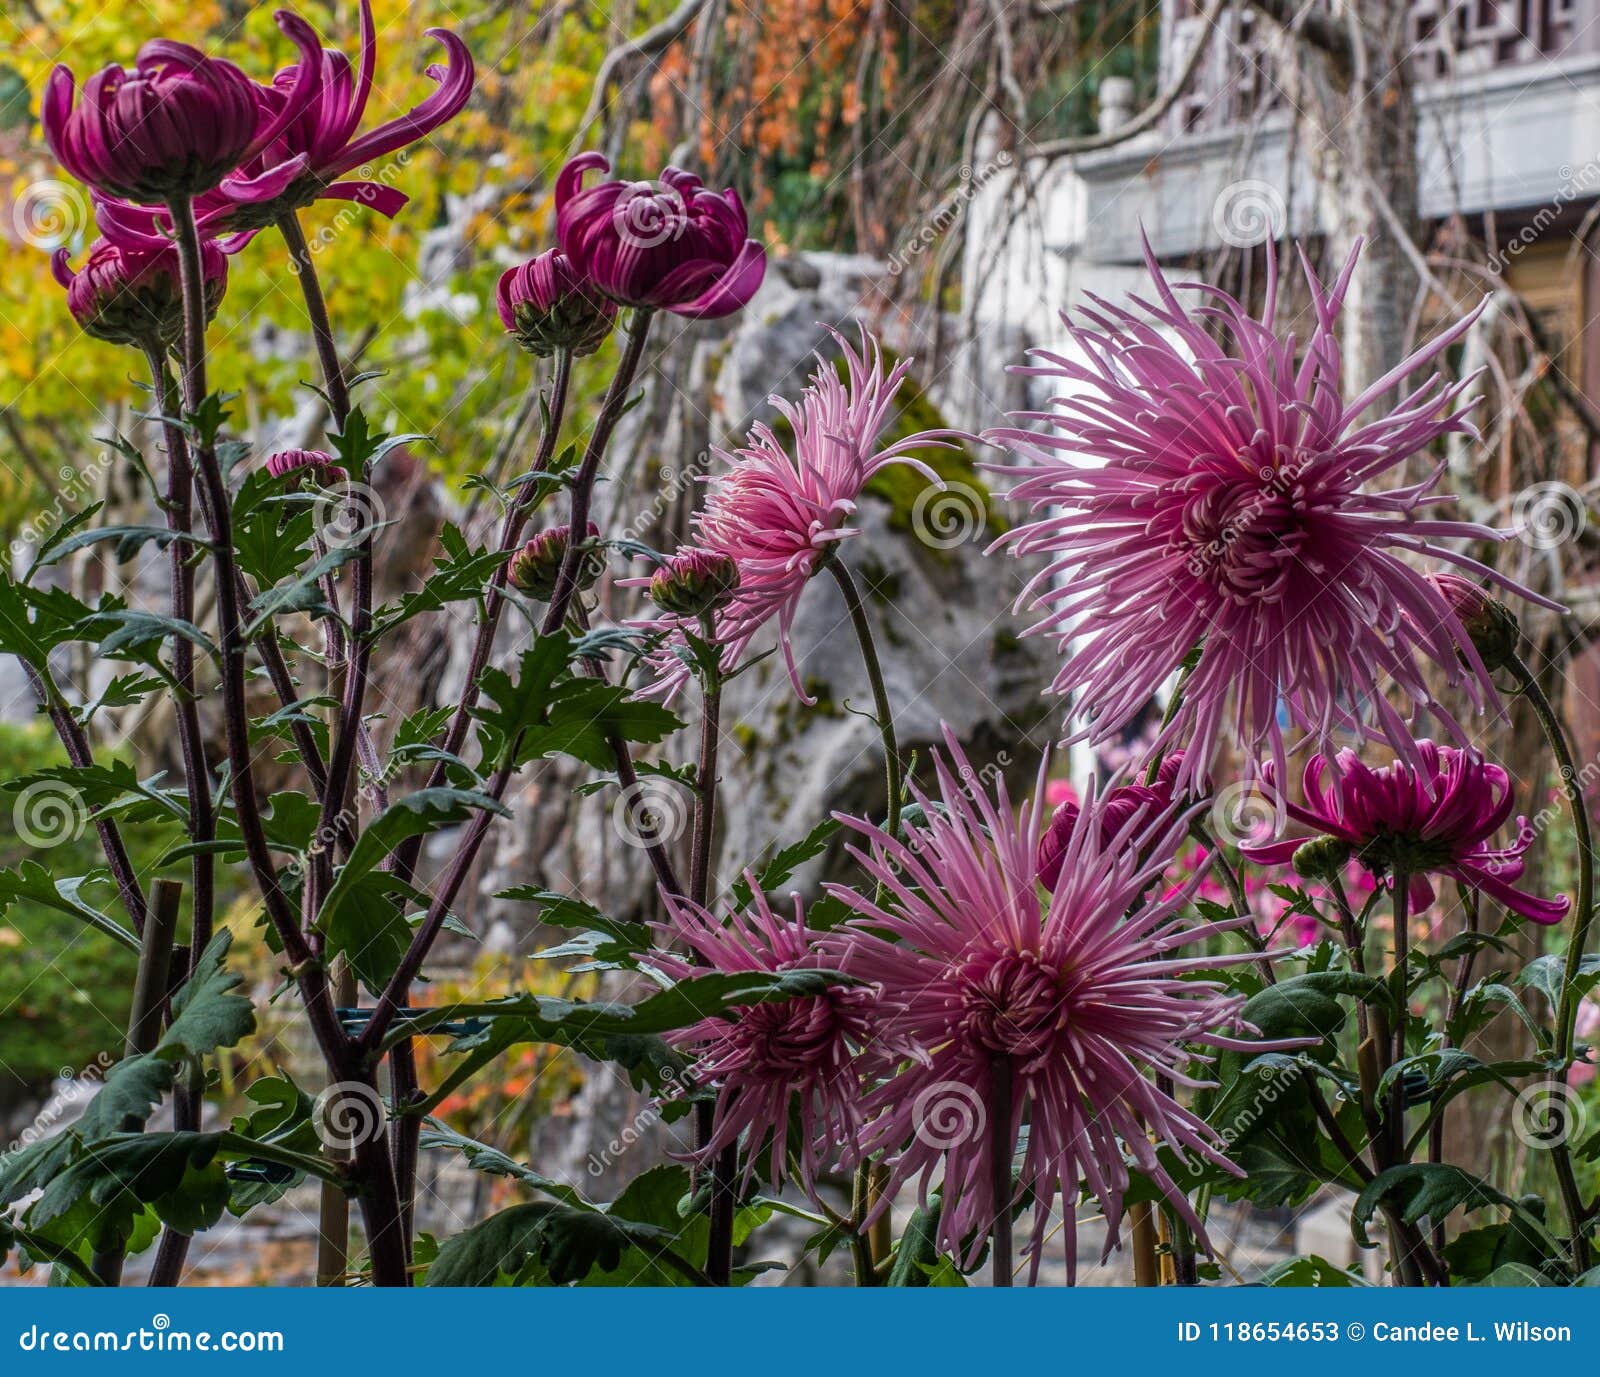 Purple Mauve Rose Spider Chrysanthemums in Chinese Garden Stock Image -  Image of green, autumn: 118654653